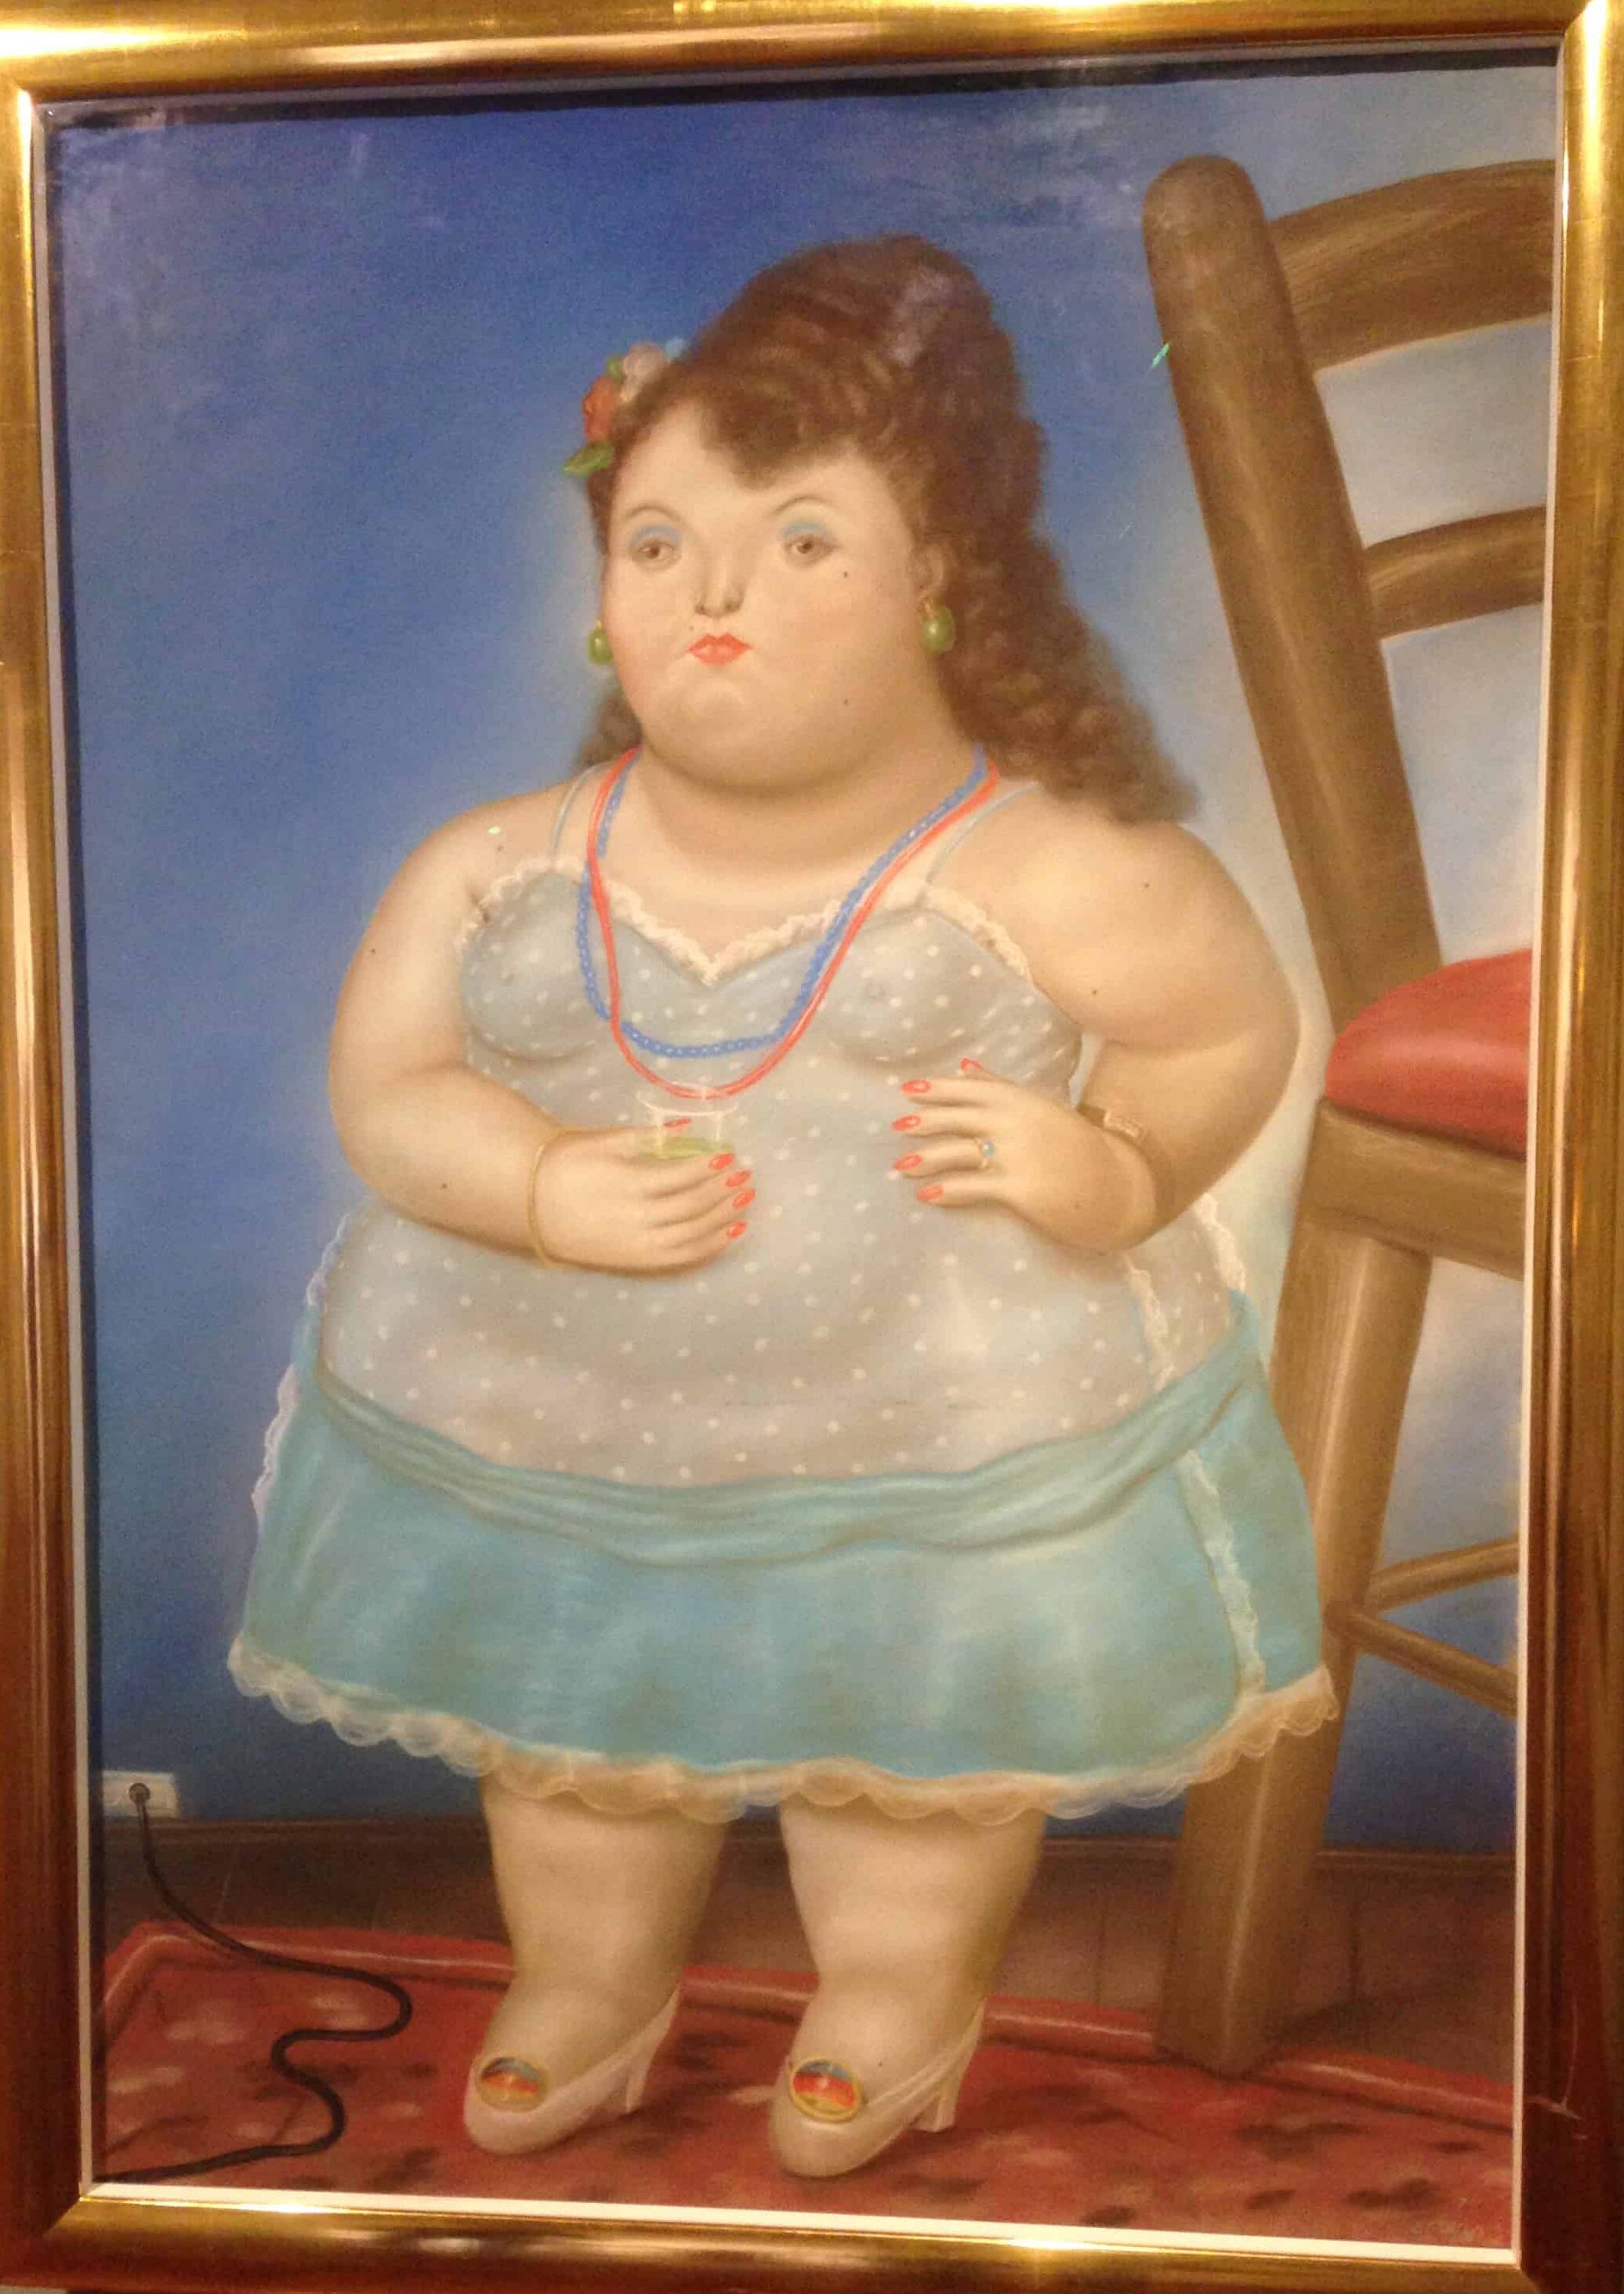 Painting of a woman at the Botero Museum in La Candelaria, Bogotá, Colombia